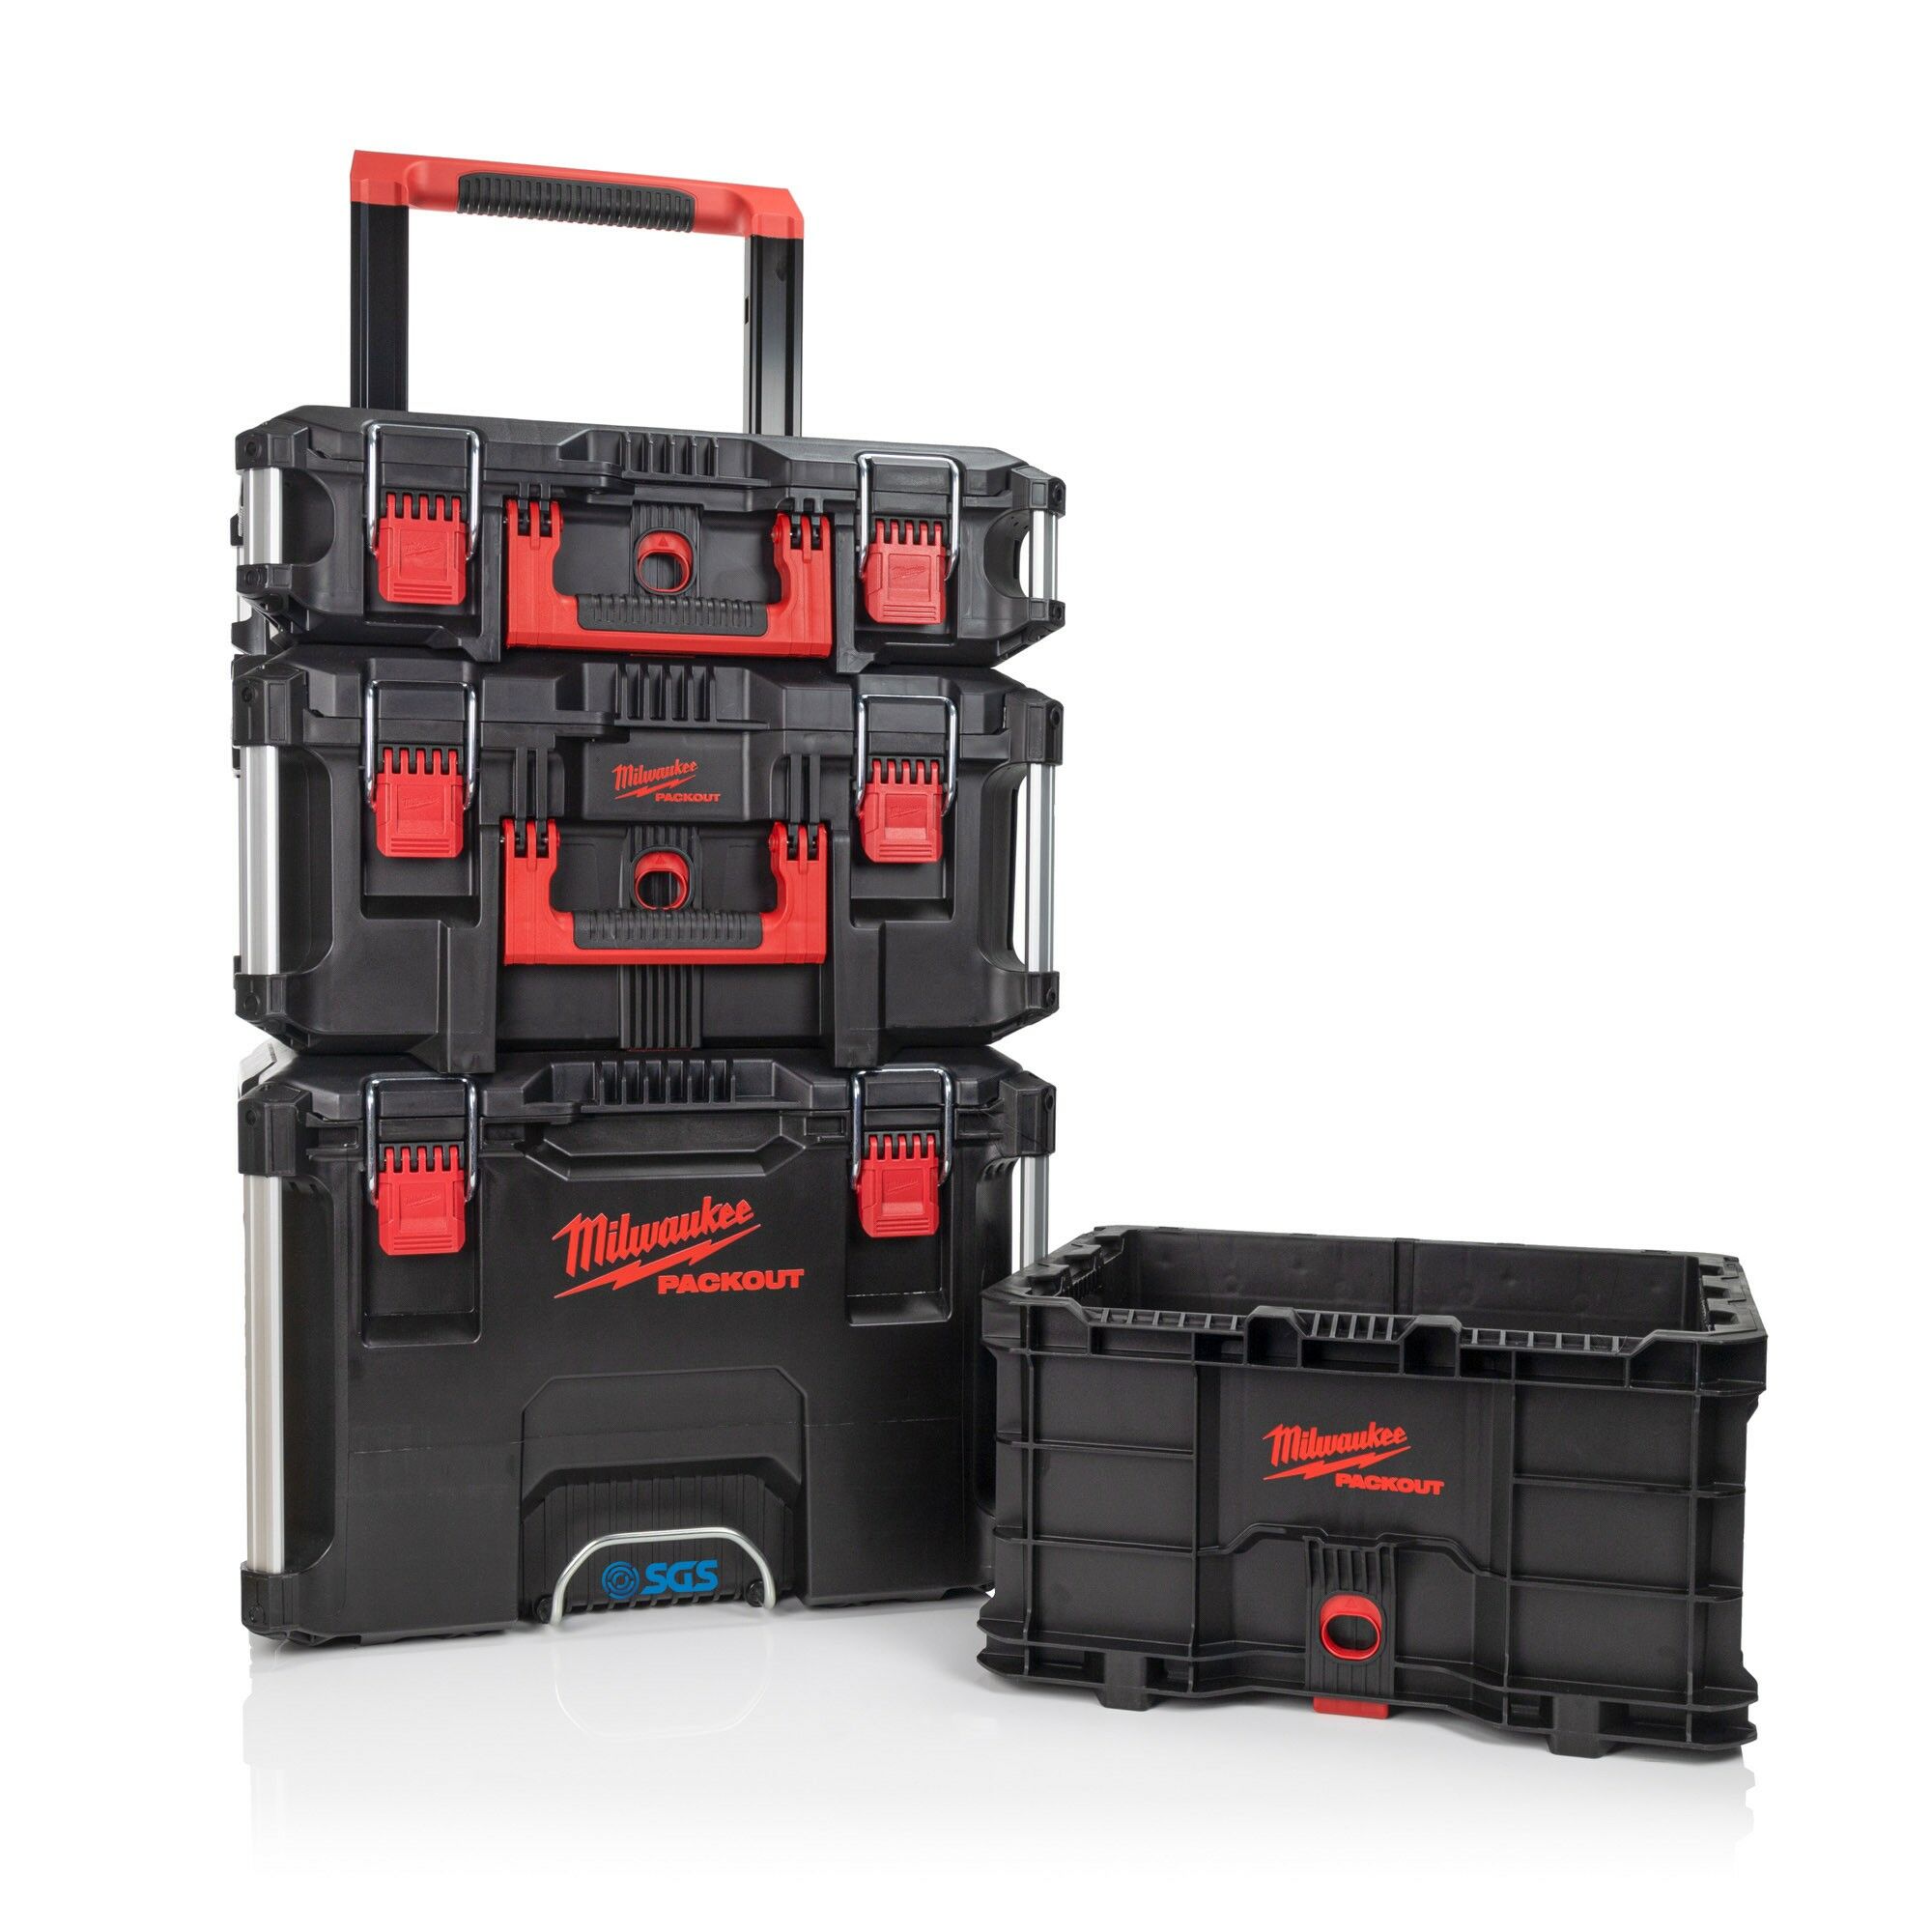 Milwaukee PACKOUT Bundle with 3 Piece Toolbox System and Crate